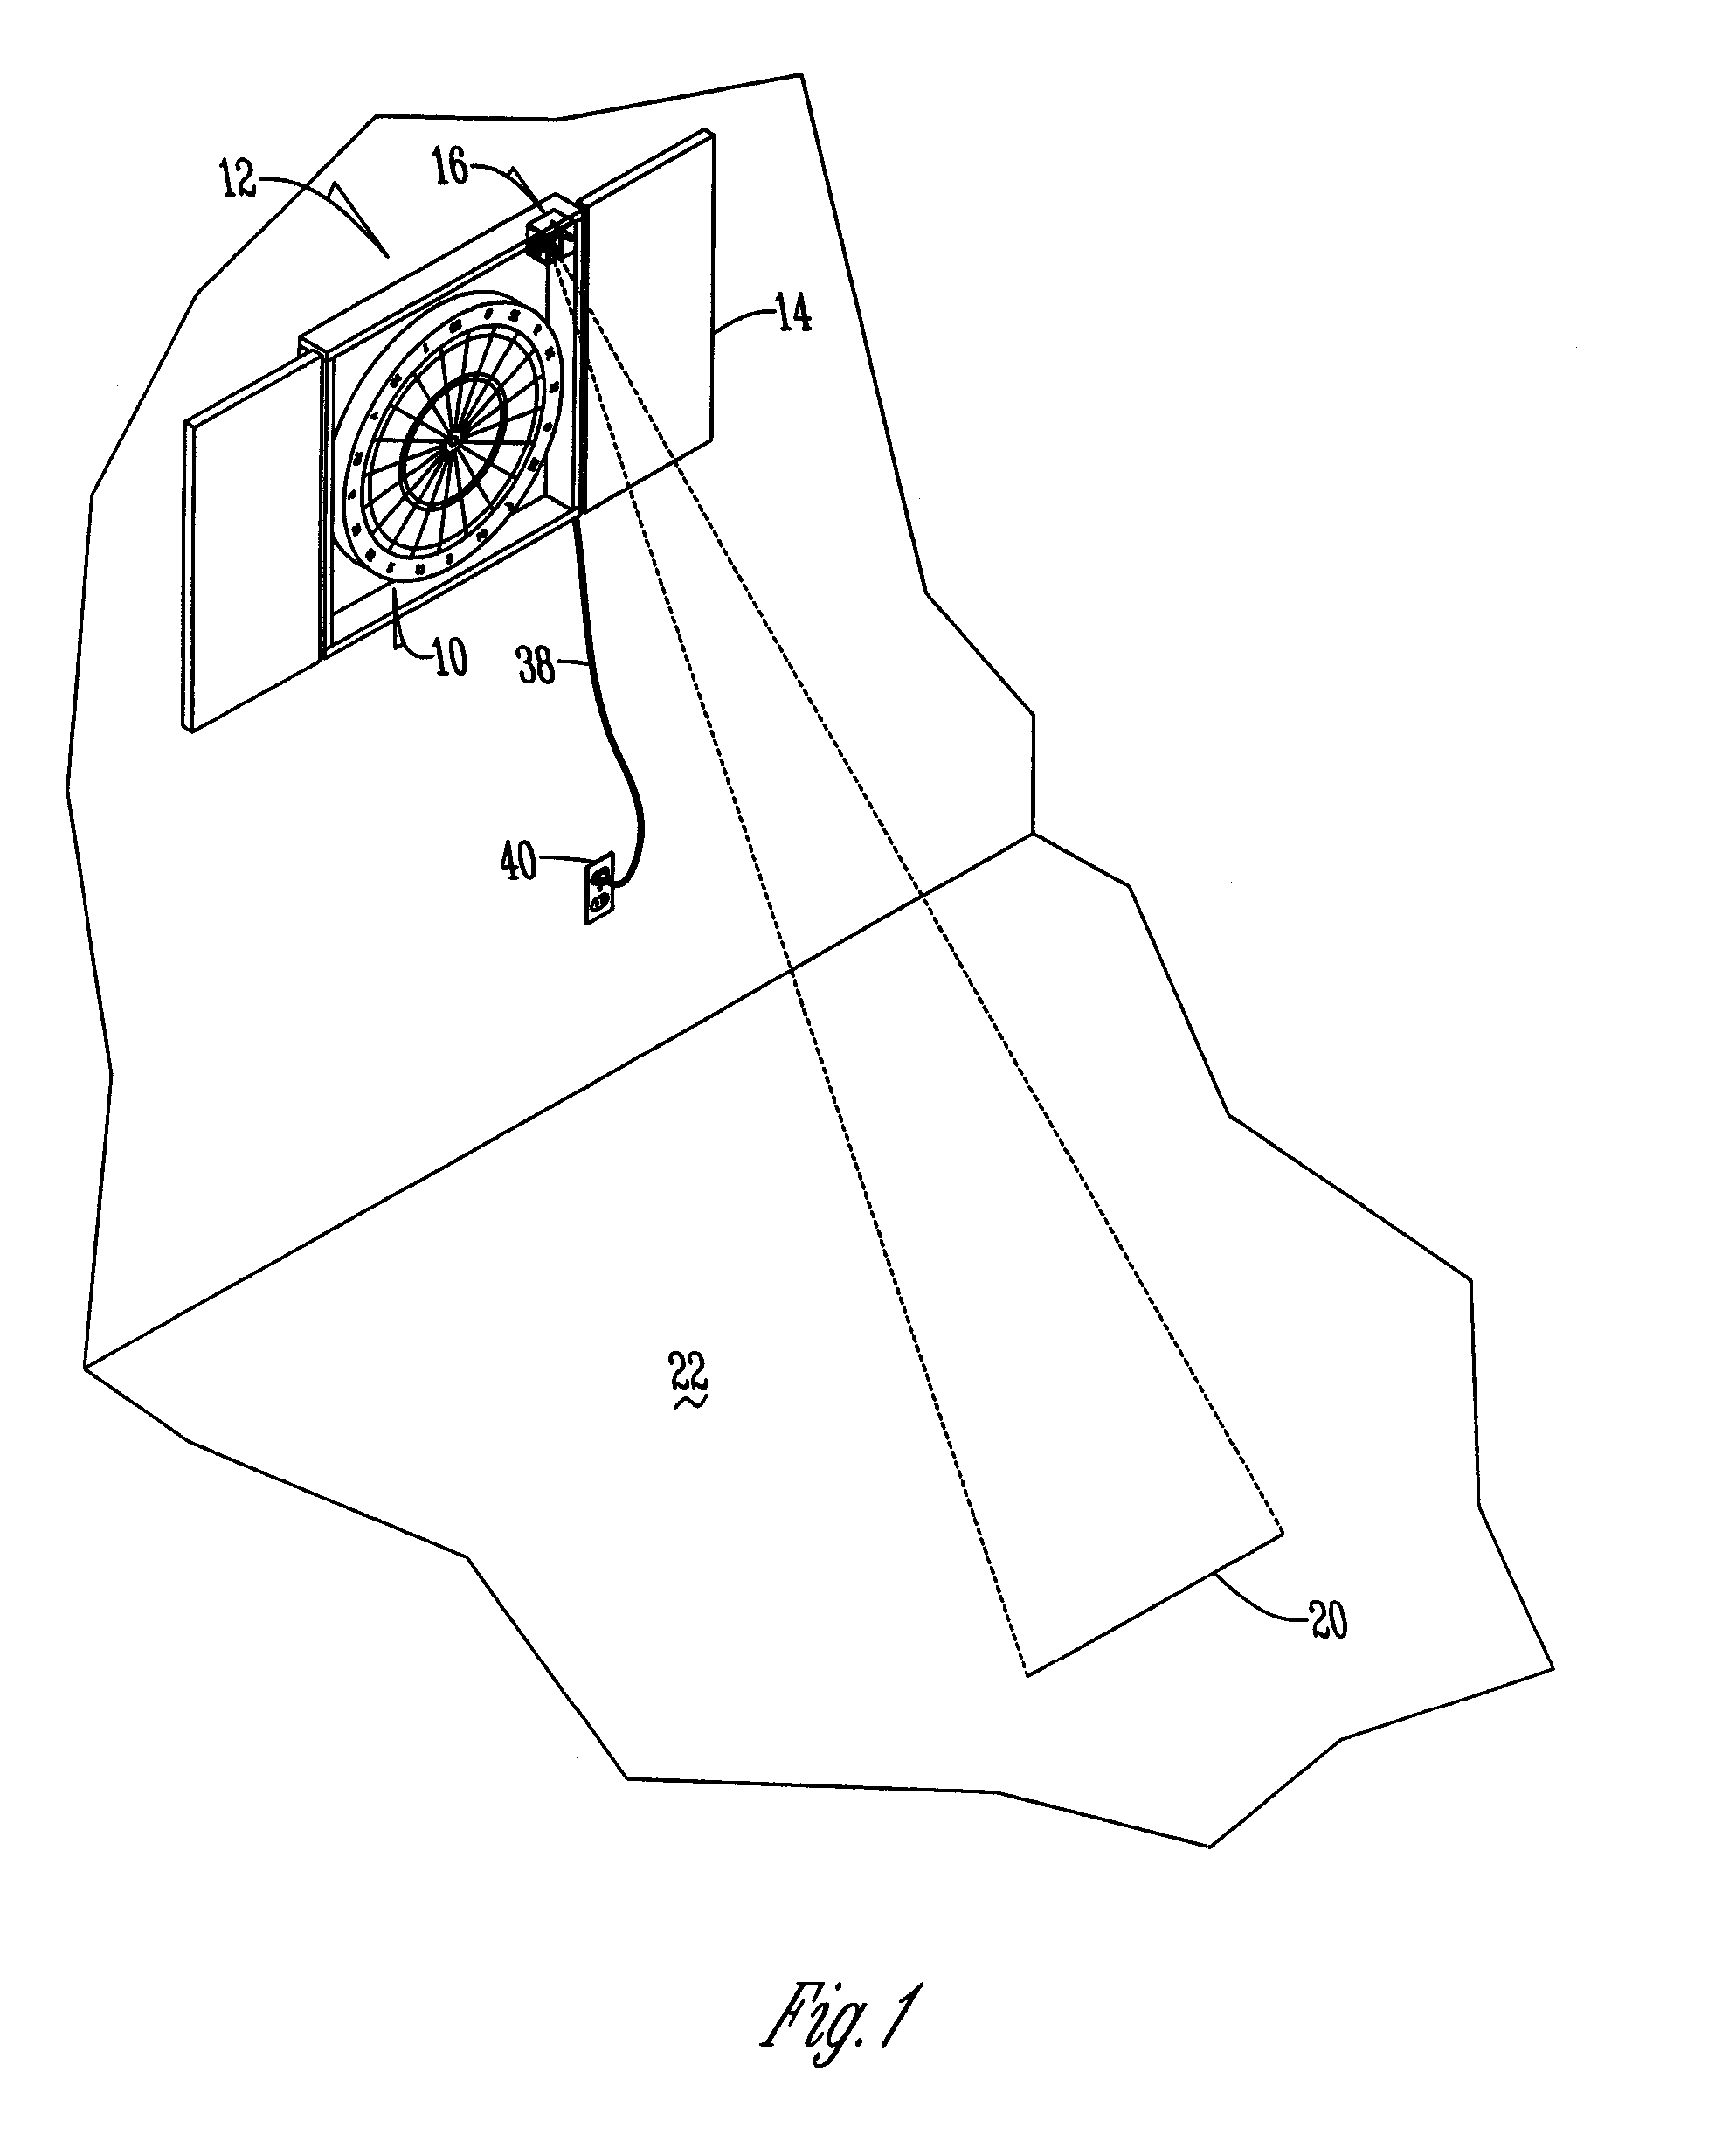 Method of providing a dart line for a dartboard and apparatus for producing the same